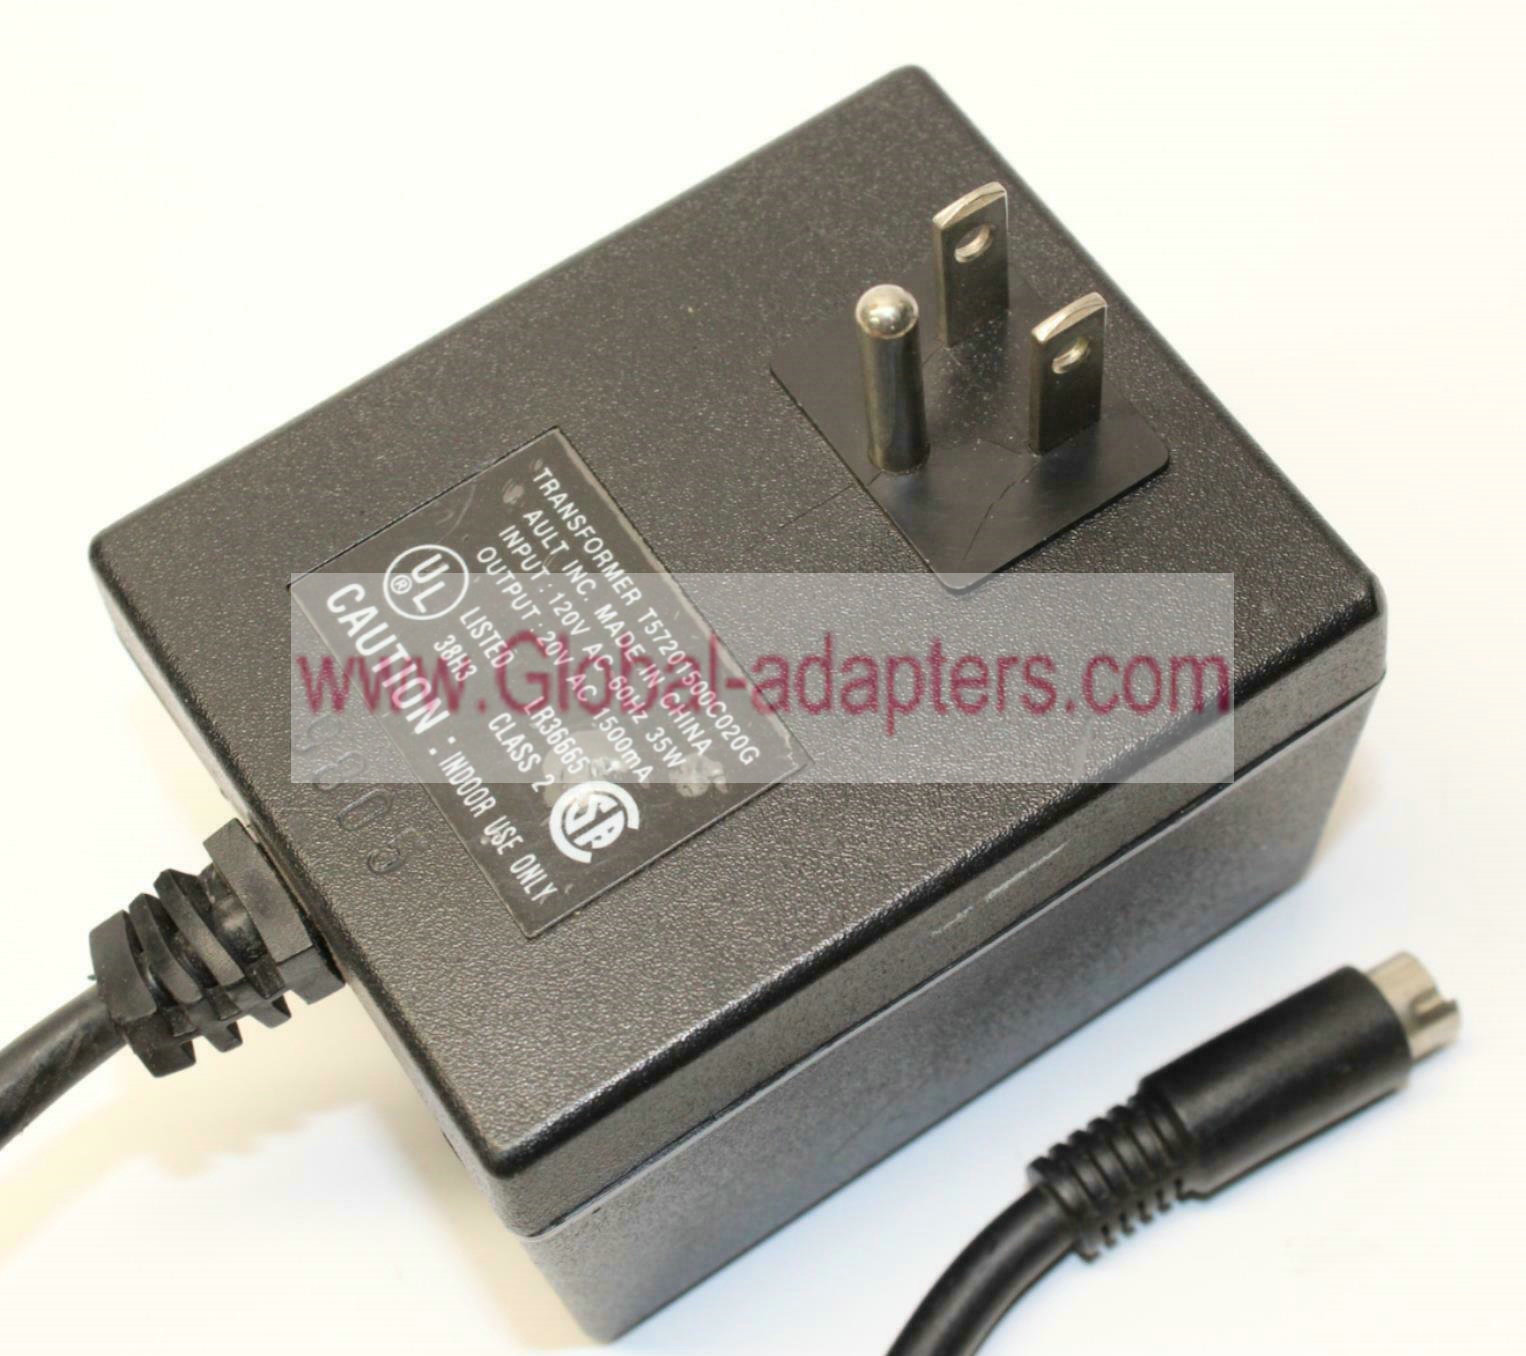 New Ault T57201500C020G Class 2 Transformer Power Supply 20VAC 1500mA AC Adapter Specification: Br